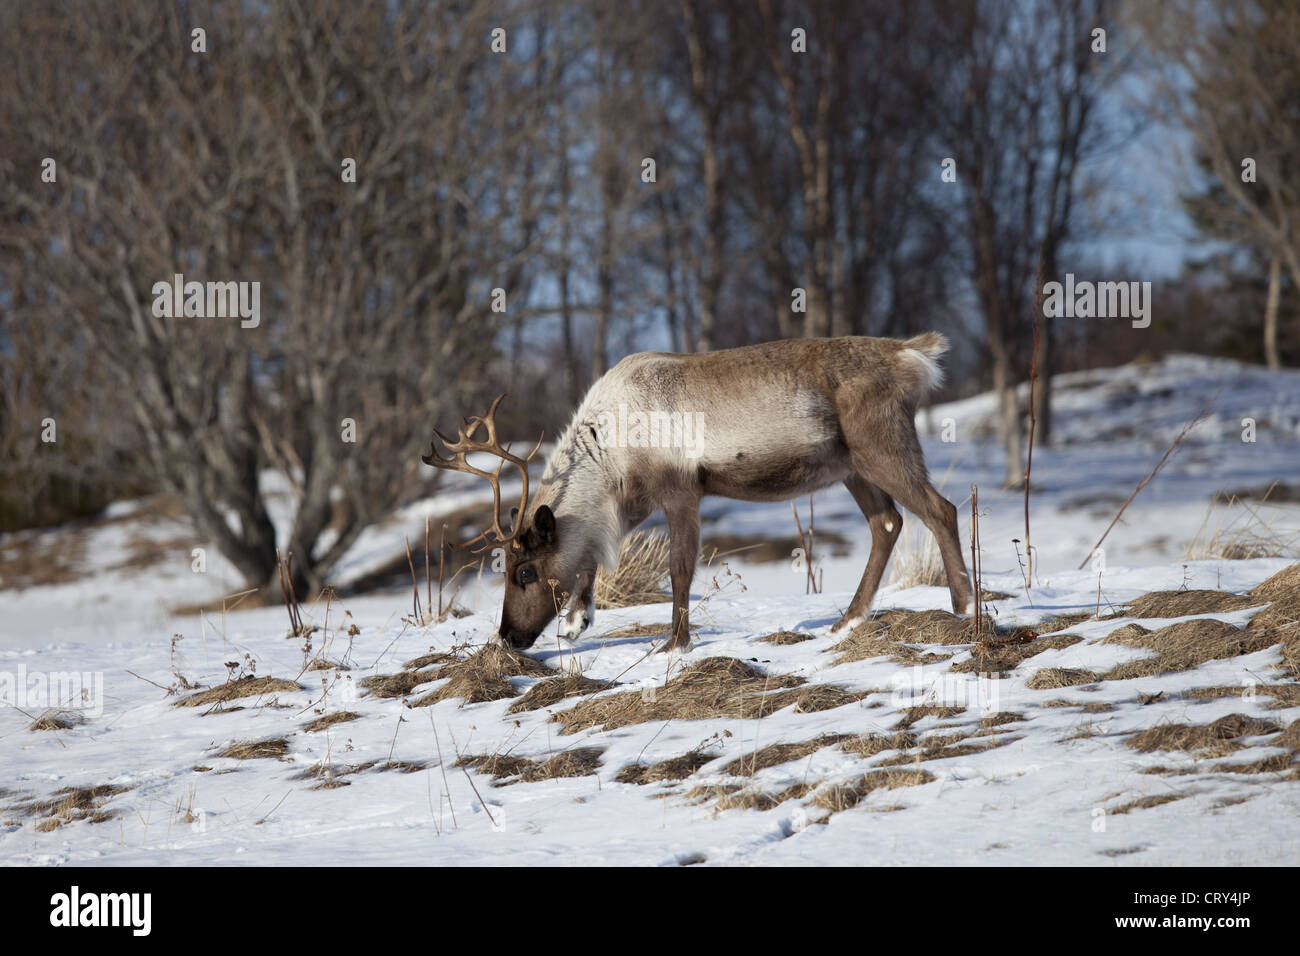 Reindeer grazing in the snow in arctic landscape at Kvaløysletta, Kvaloya Island, Tromso in Arctic Circle Northern Norway Stock Photo